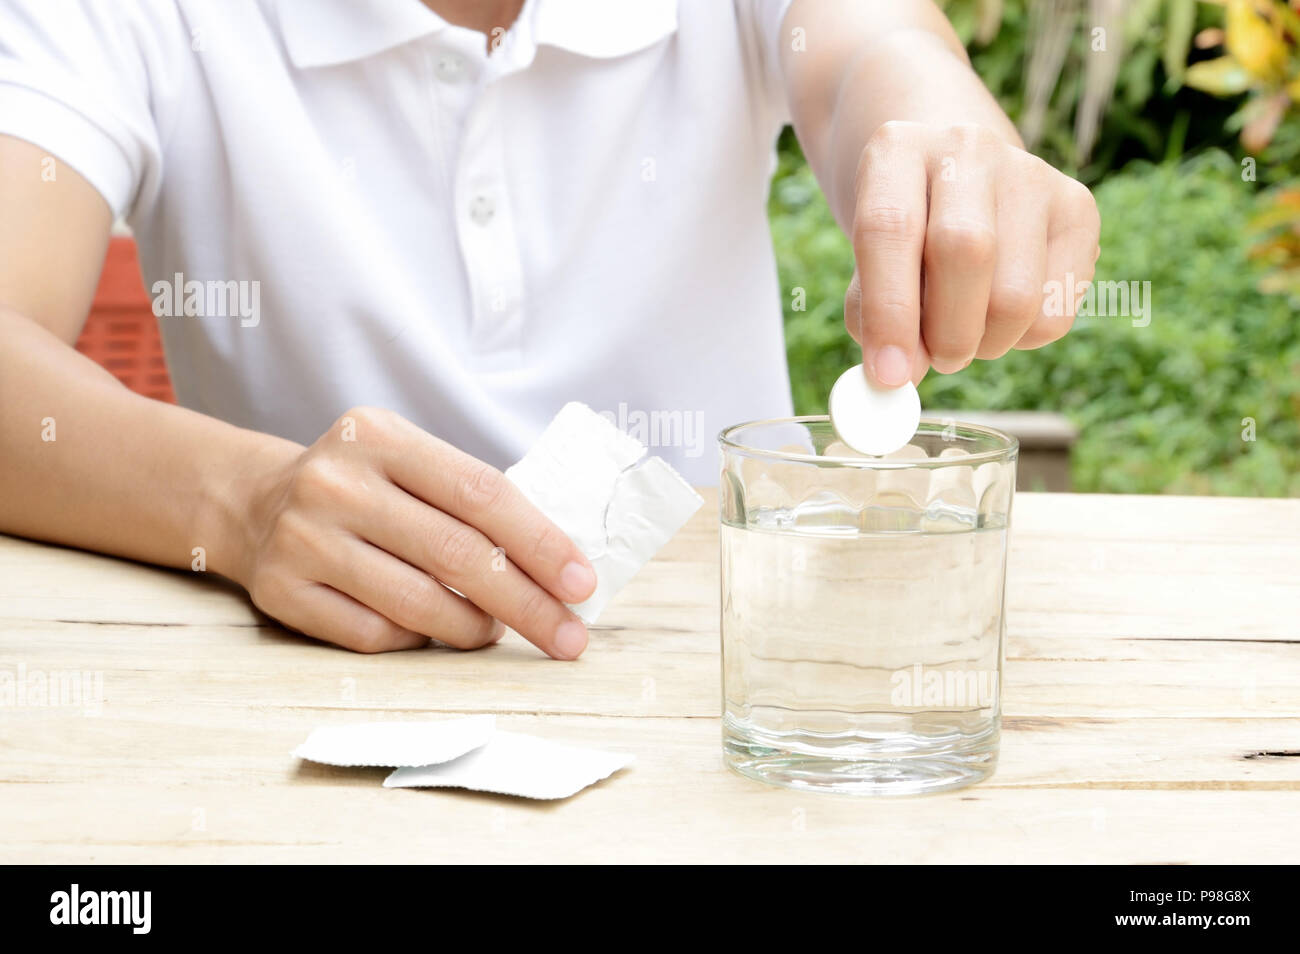 woman dropping effervescent tablet in glass of water on wooden table Stock Photo